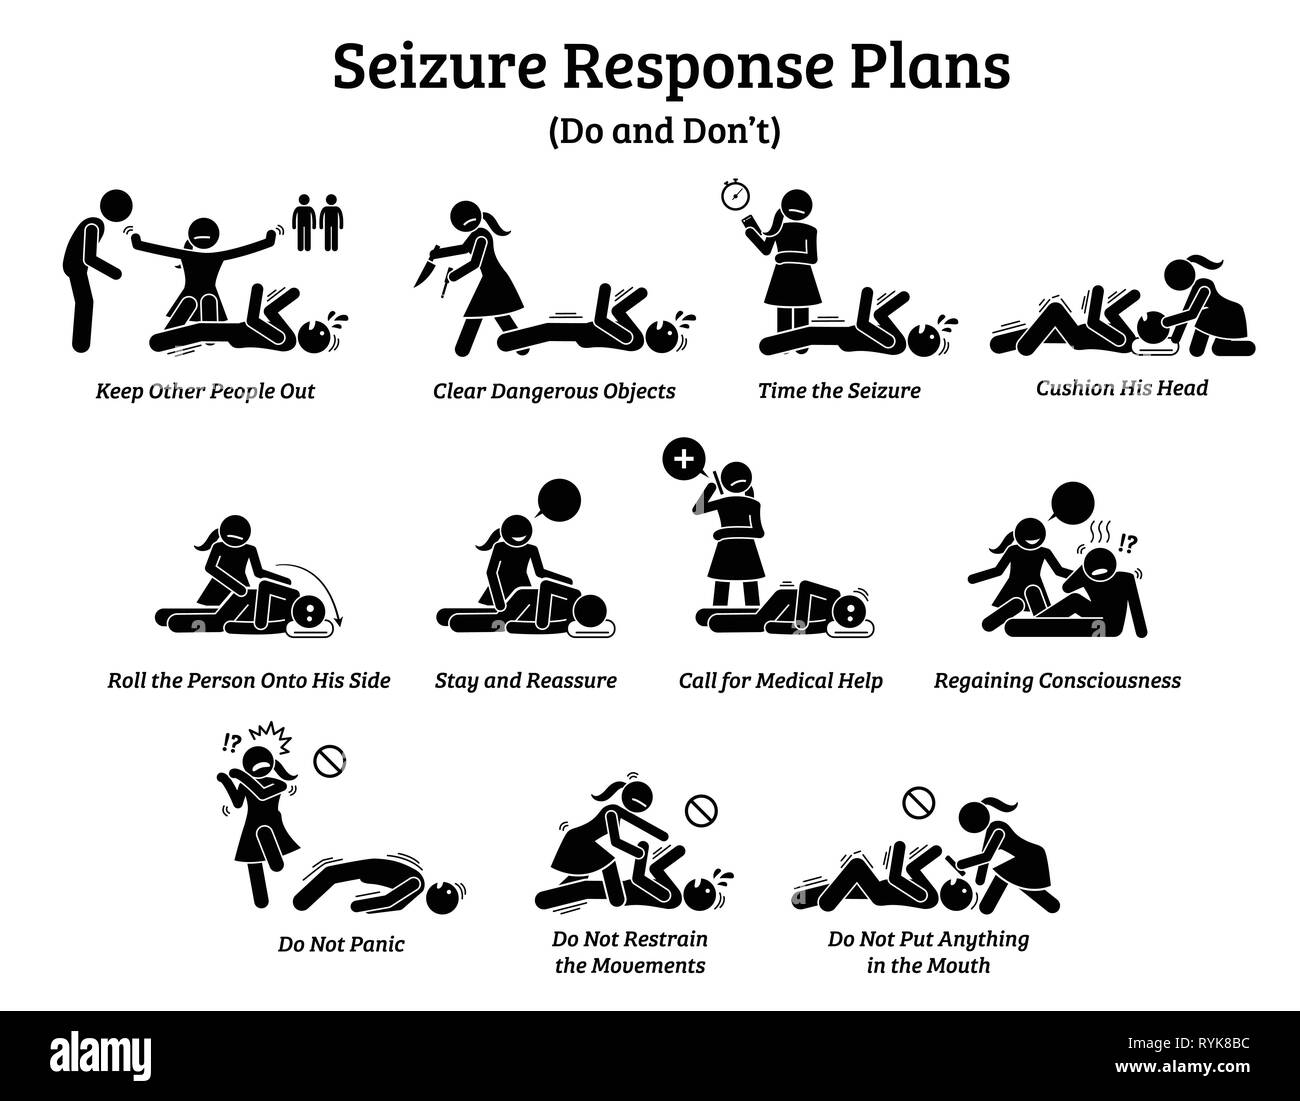 What to do during a seizure. List of seizure response plans and management. Stock Vector